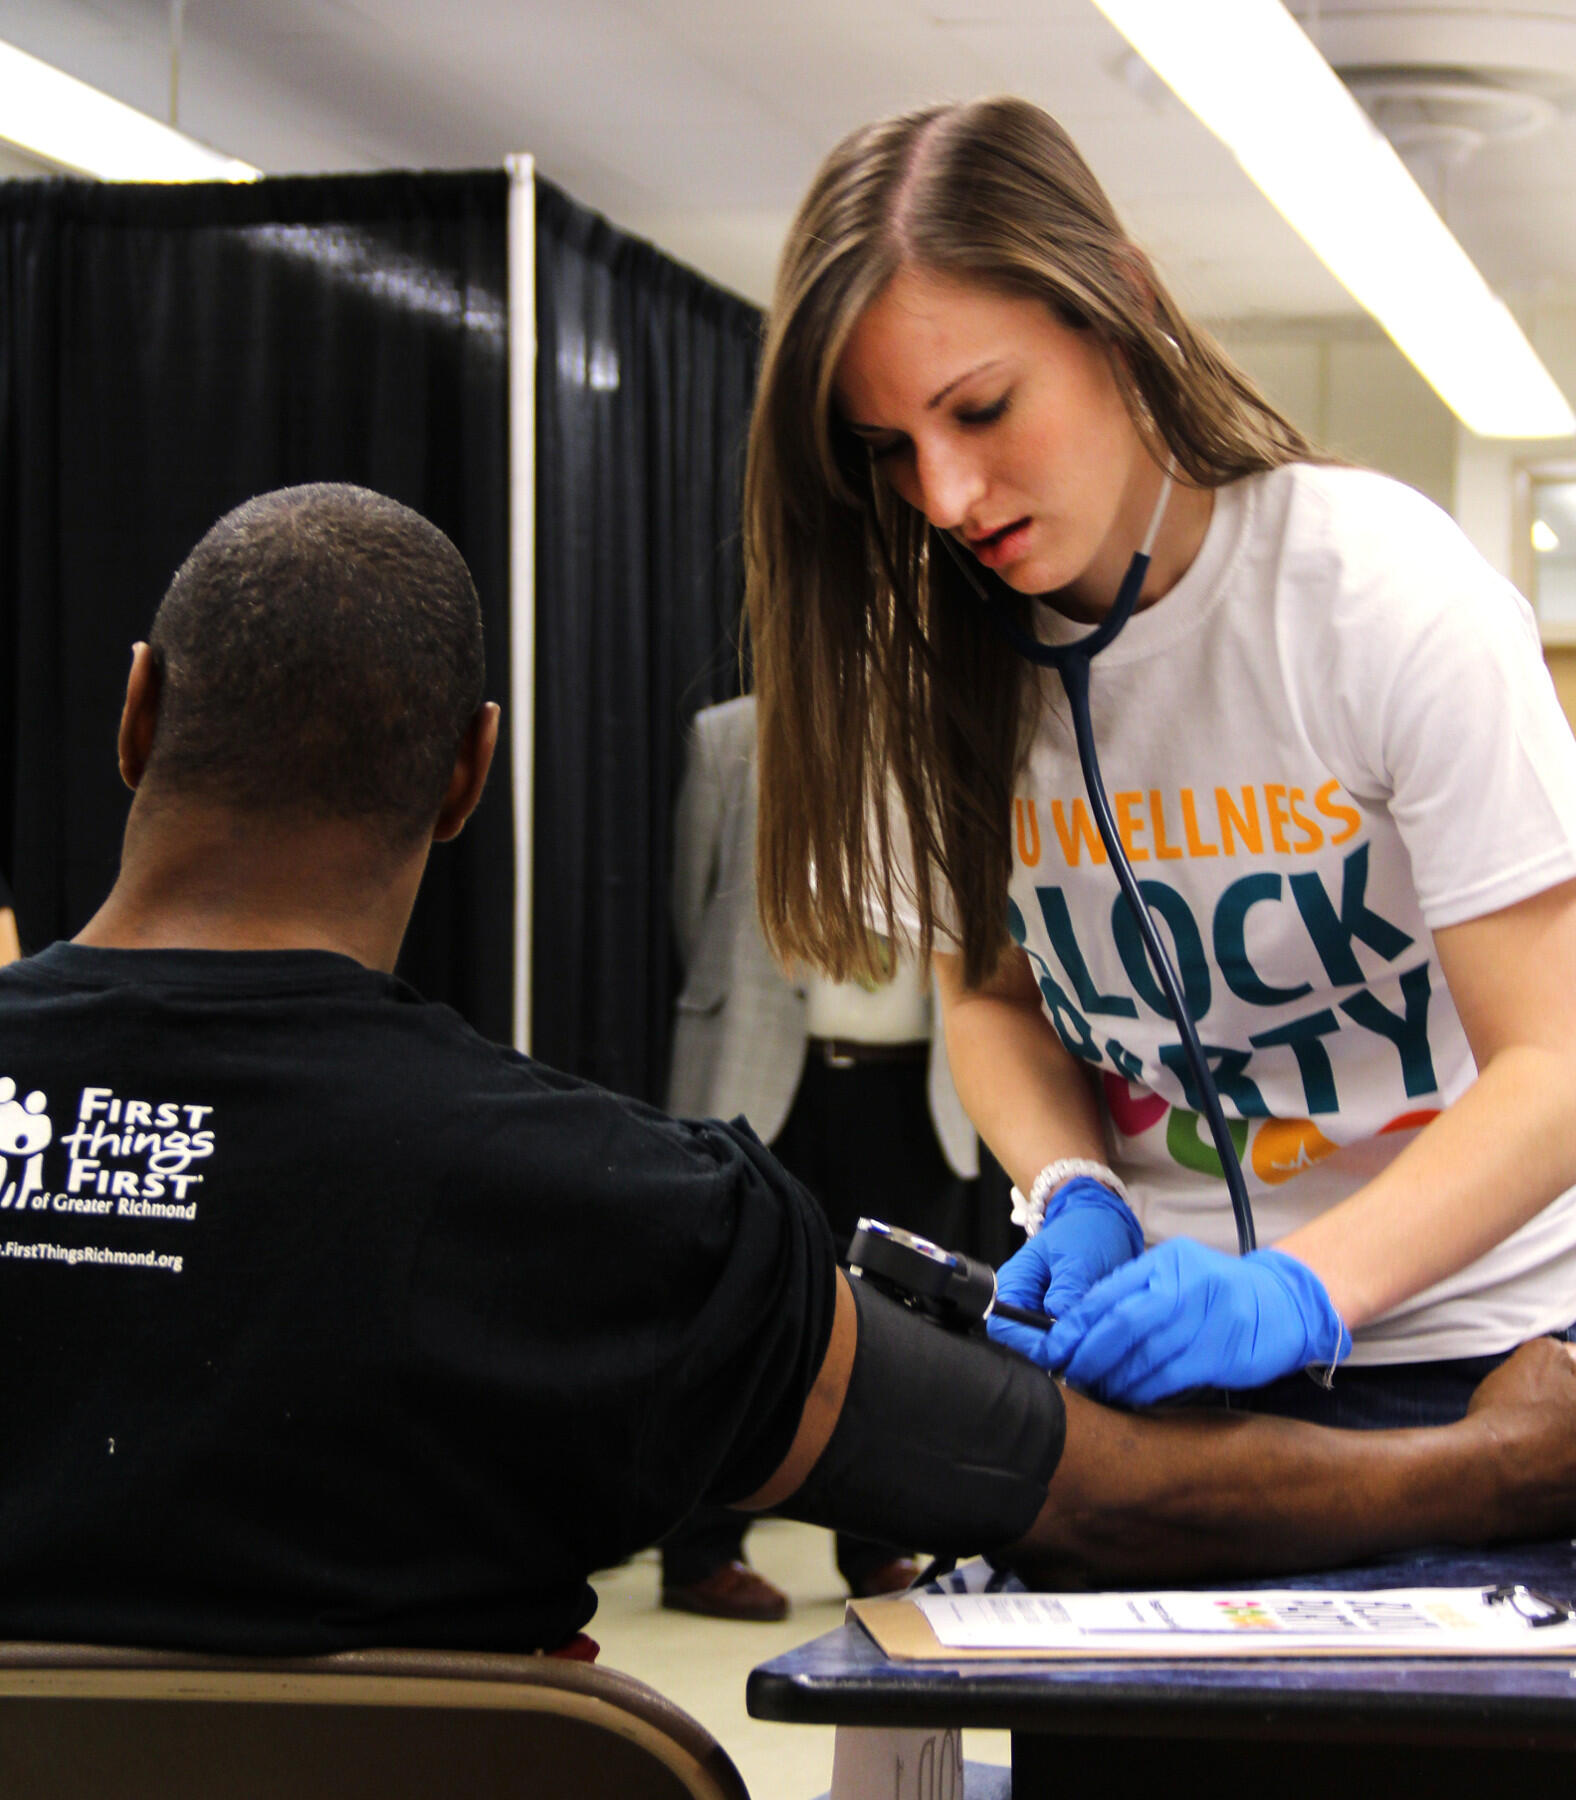 A volunteer health sciences student checks the blood pressure of a participant during the MCV Campus Student Government Association's eighth annual VCU Wellness Block Party in 2015.